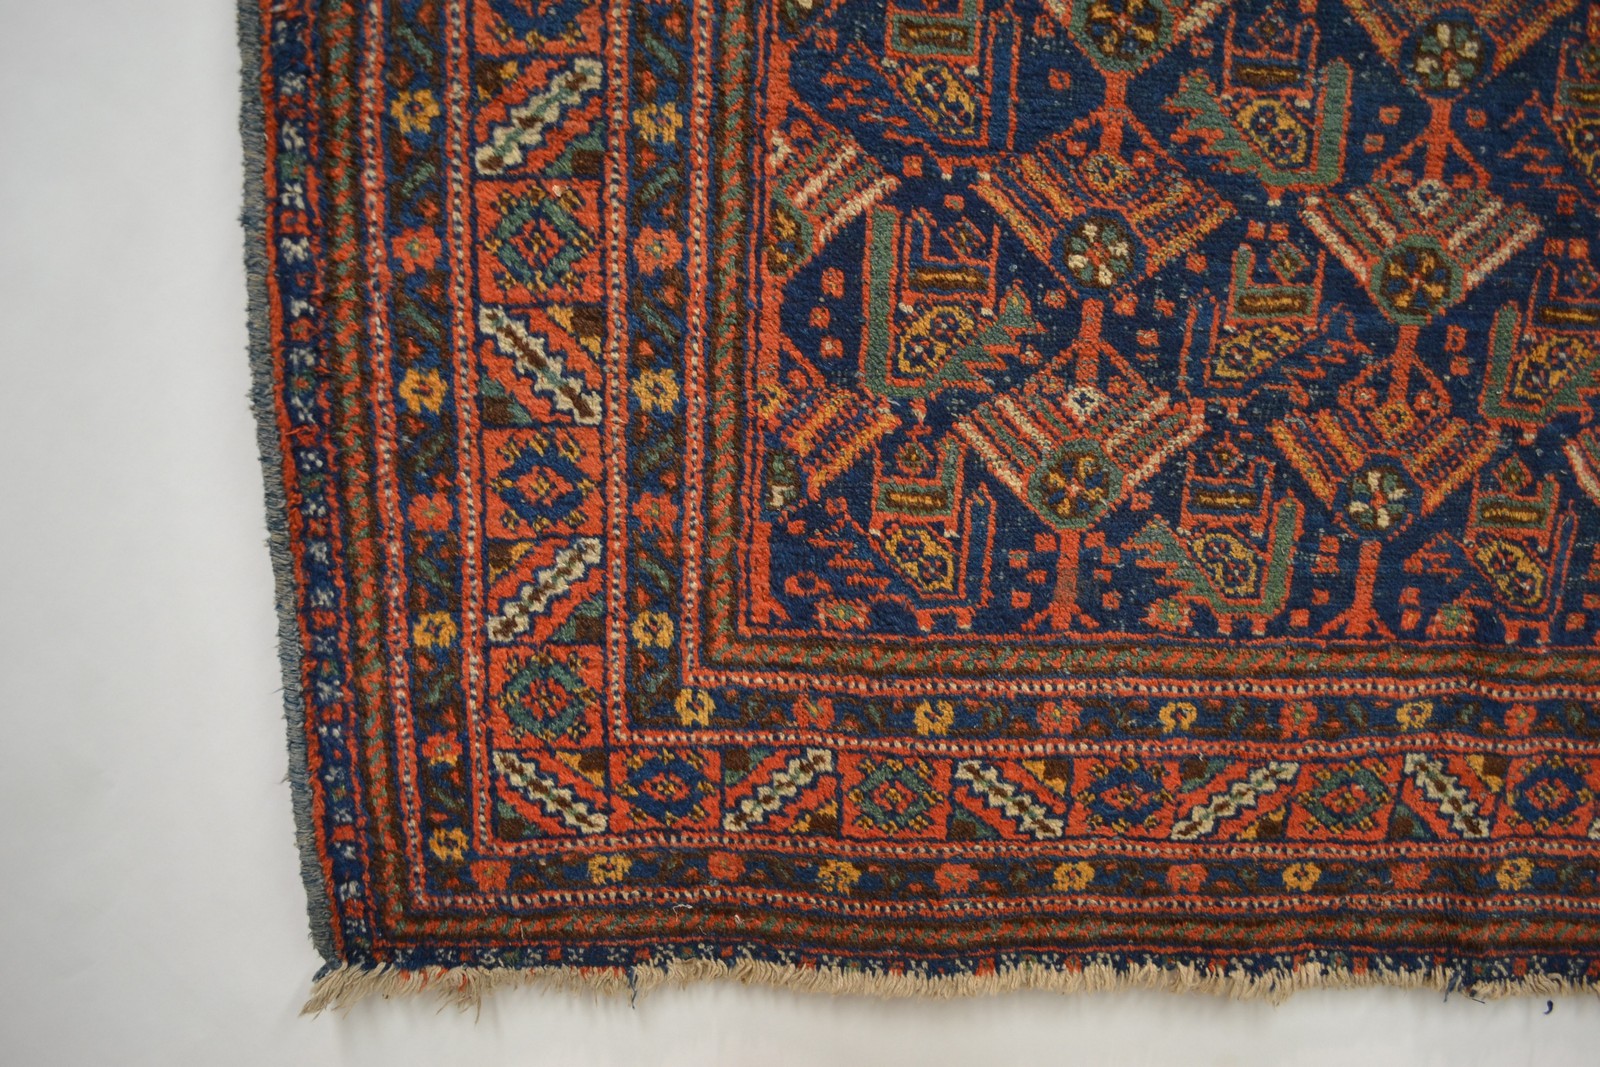 Afshar rug, Kerman area, south west Persia, about 1930s, 6ft. x 5ft. 1.83m. x 1.52m. Overall wear. - Image 4 of 4